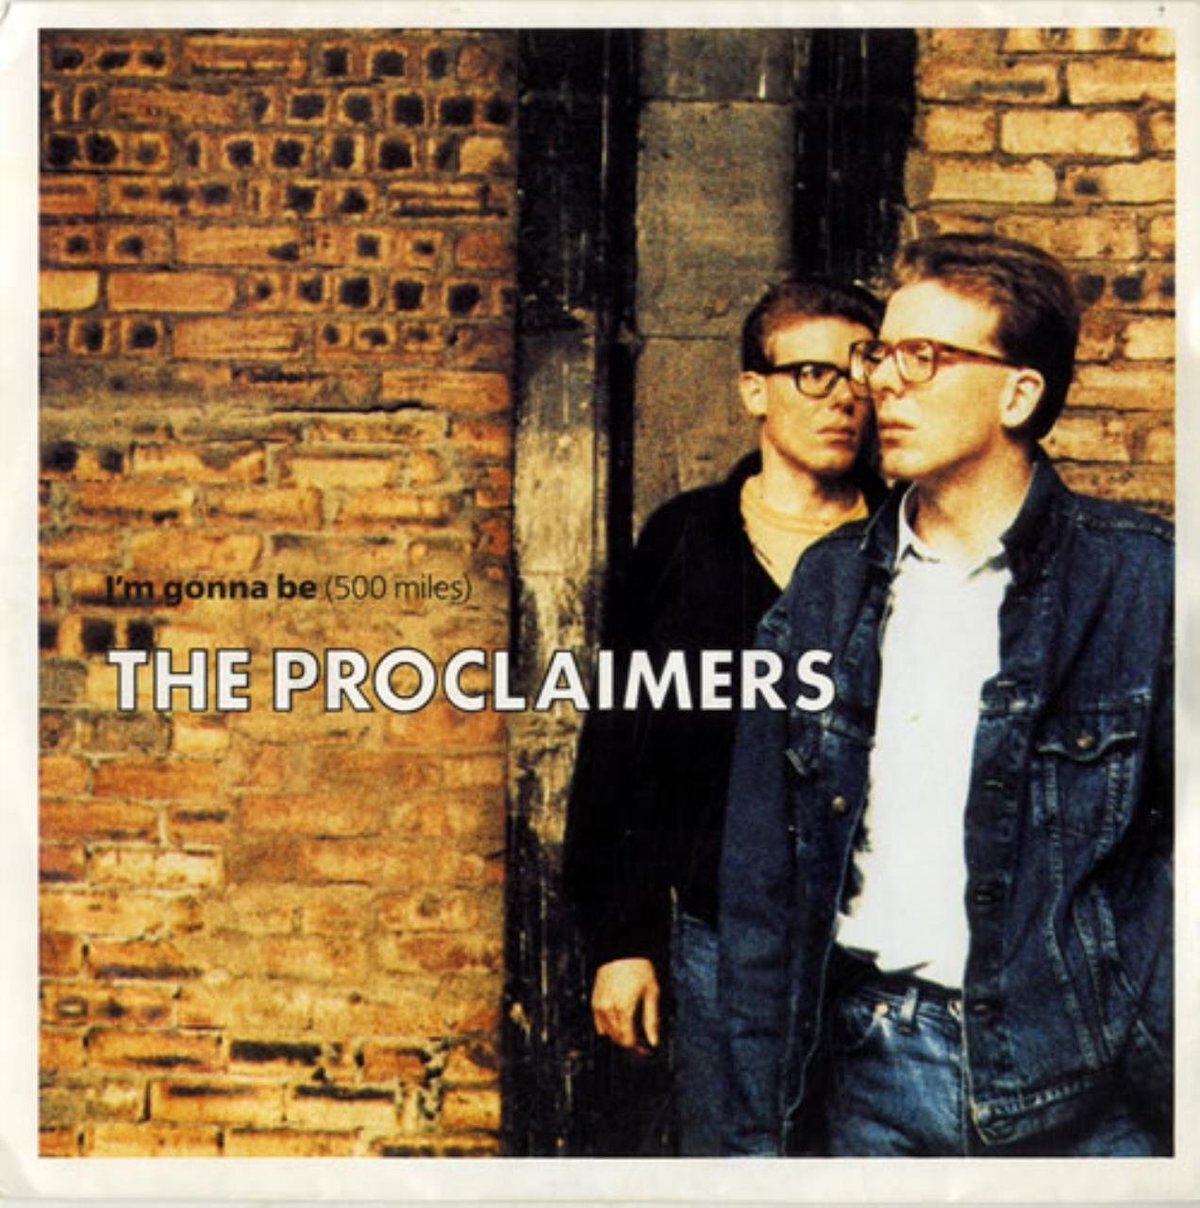 the proclaimers album cover for 500 miles, a 1980s one-hit wonder